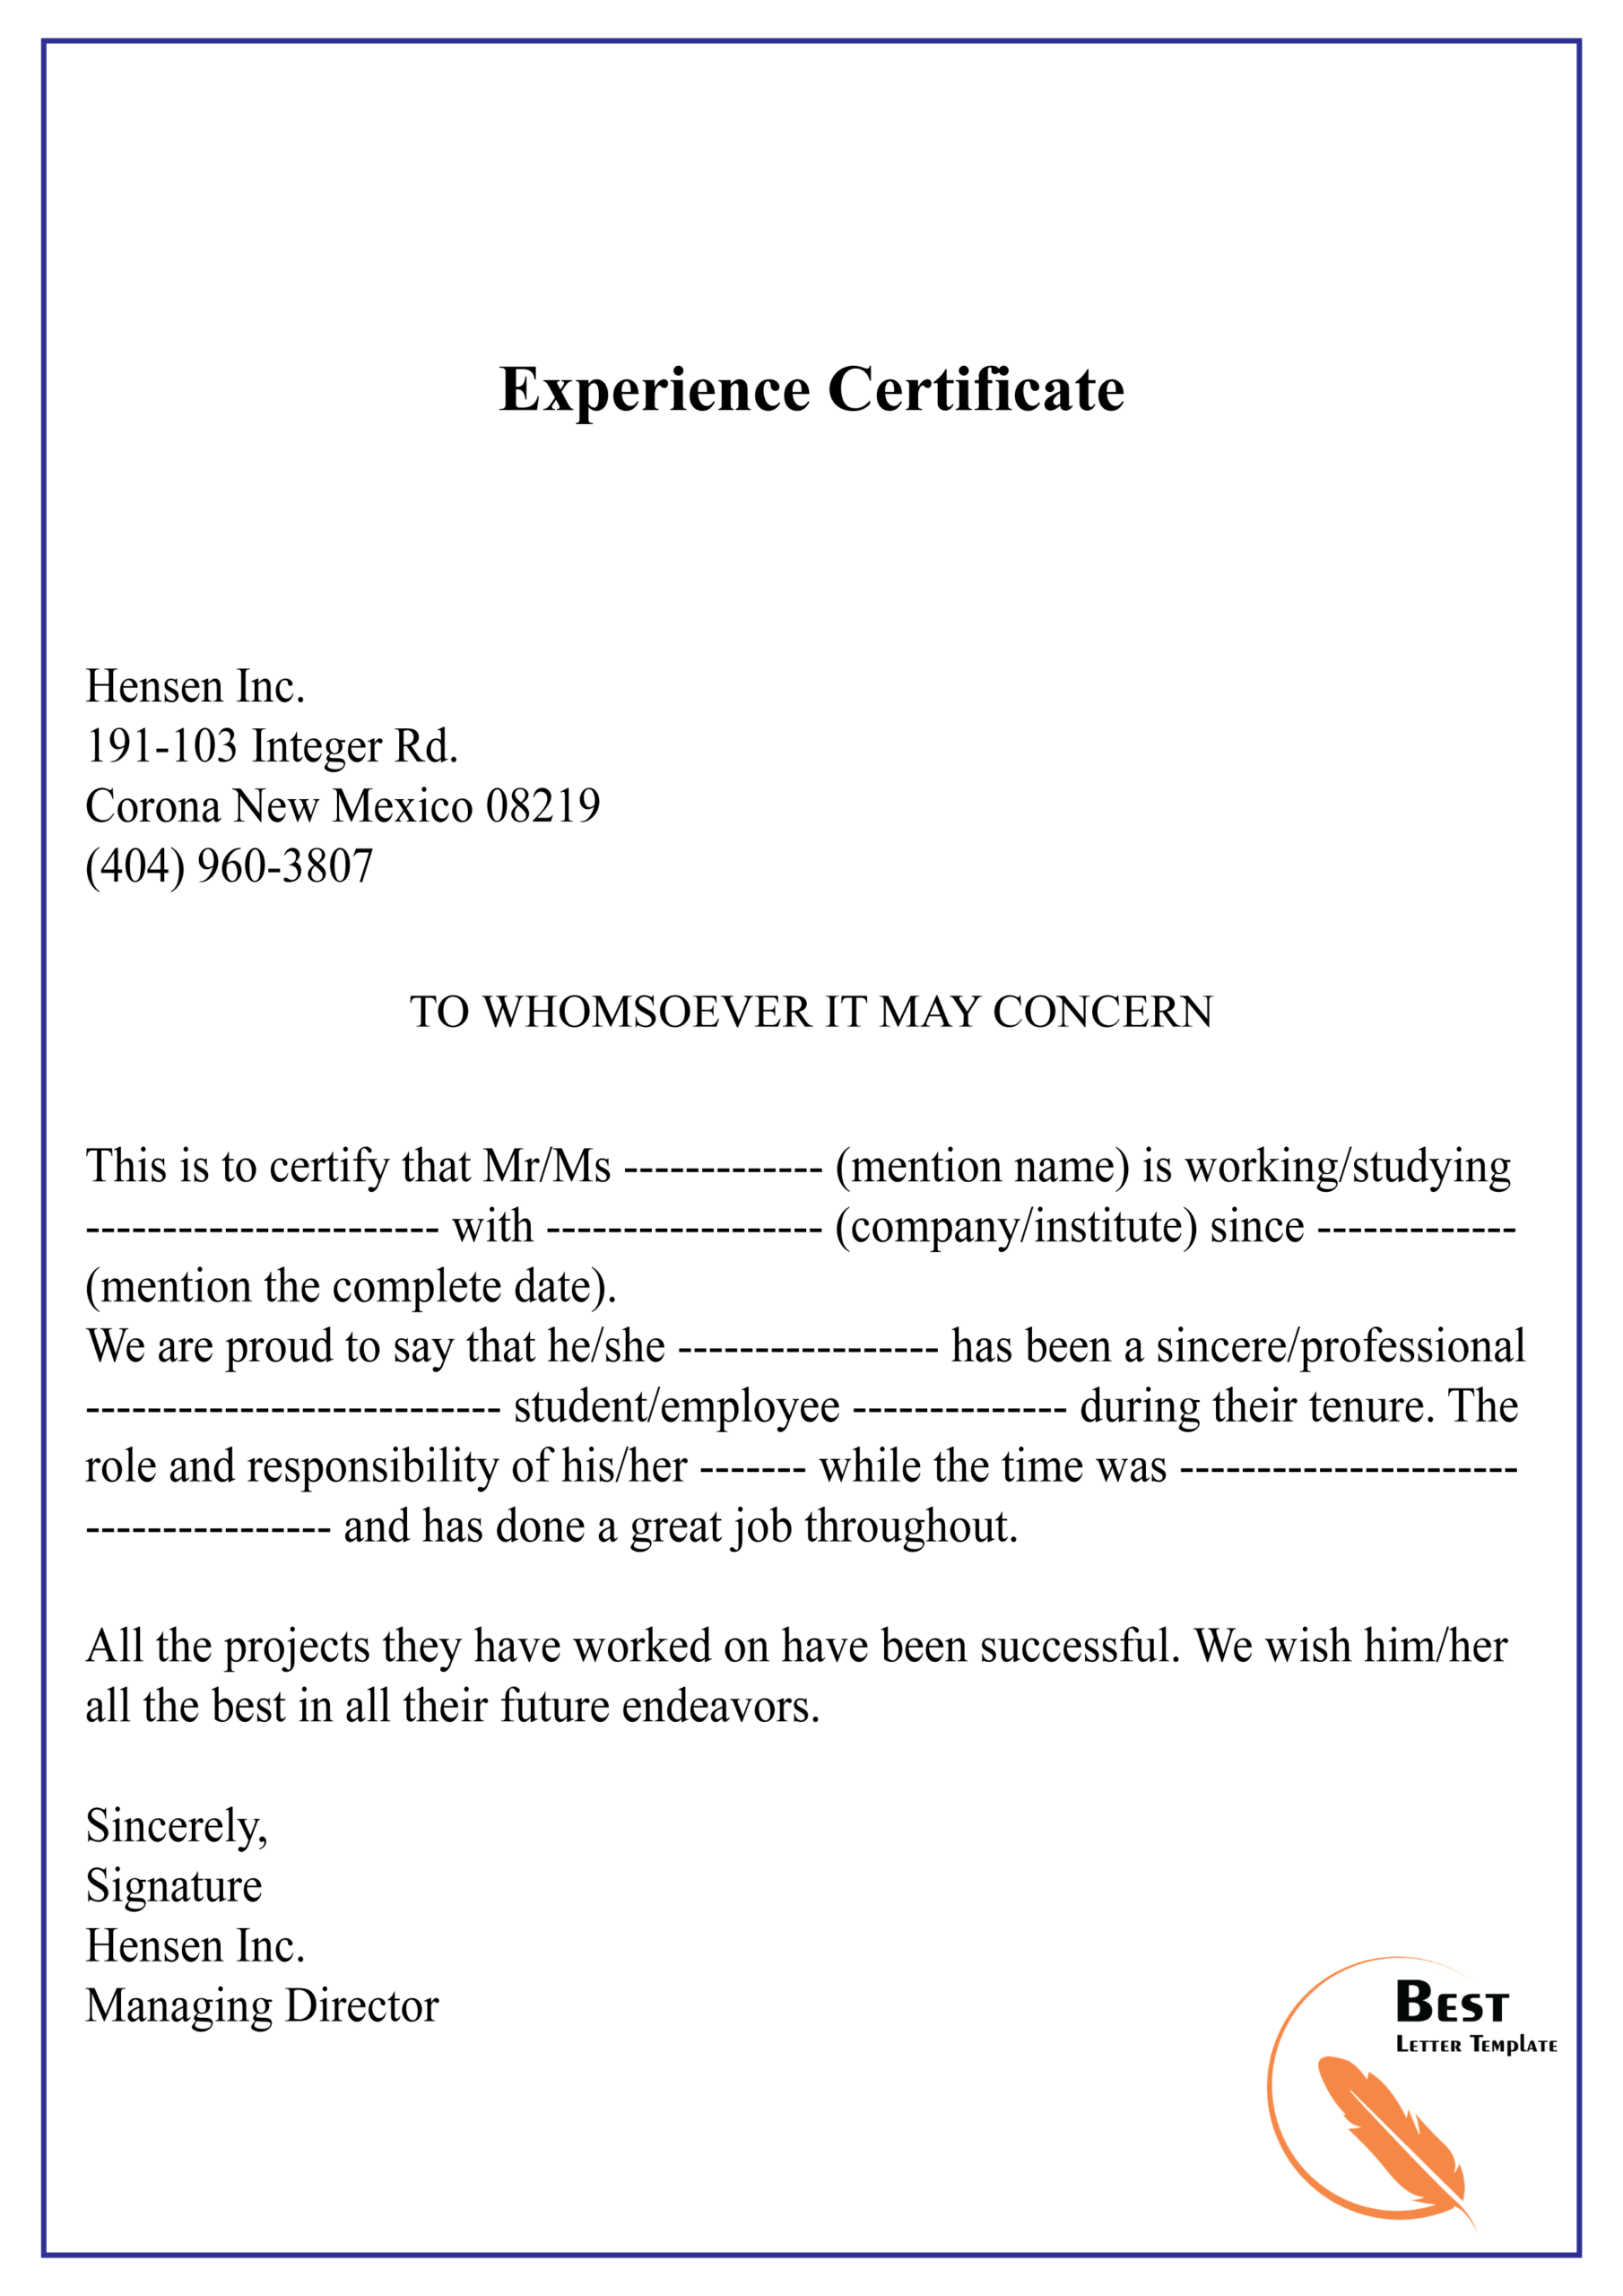 Experience Certificate 01 | Best Letter Template Regarding Template Of Experience Certificate